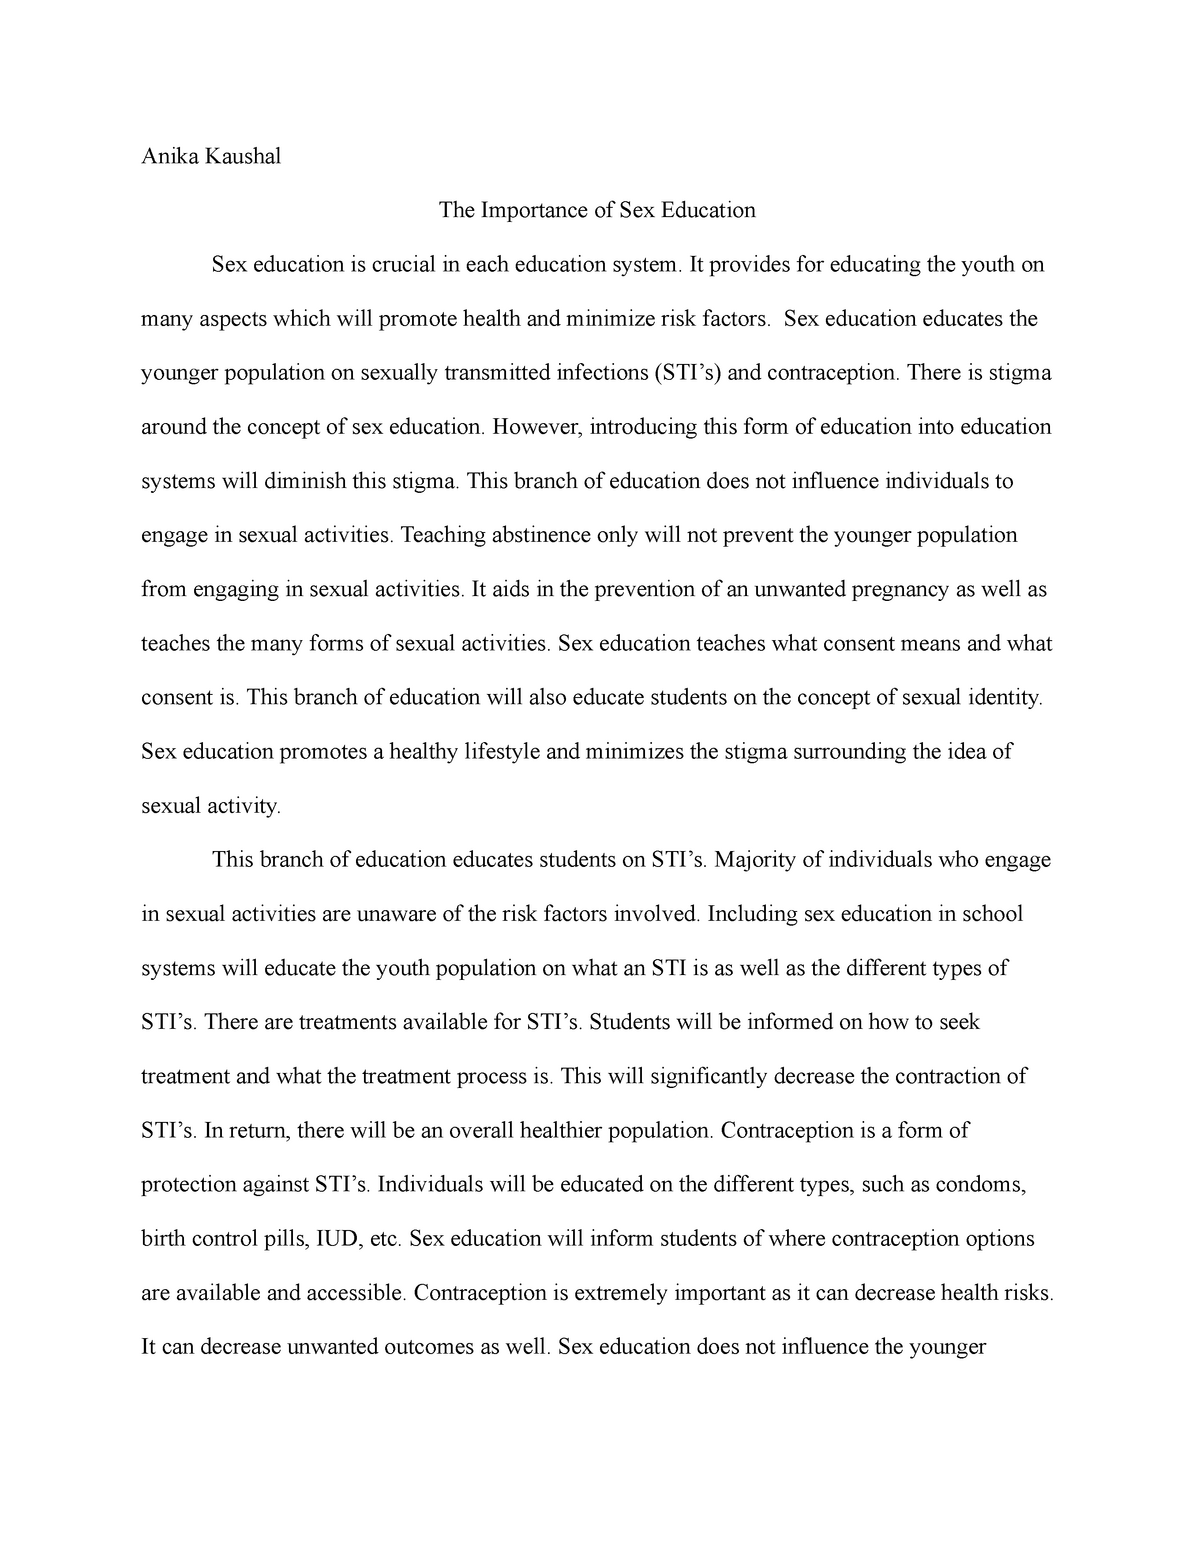 thesis for sex education in schools